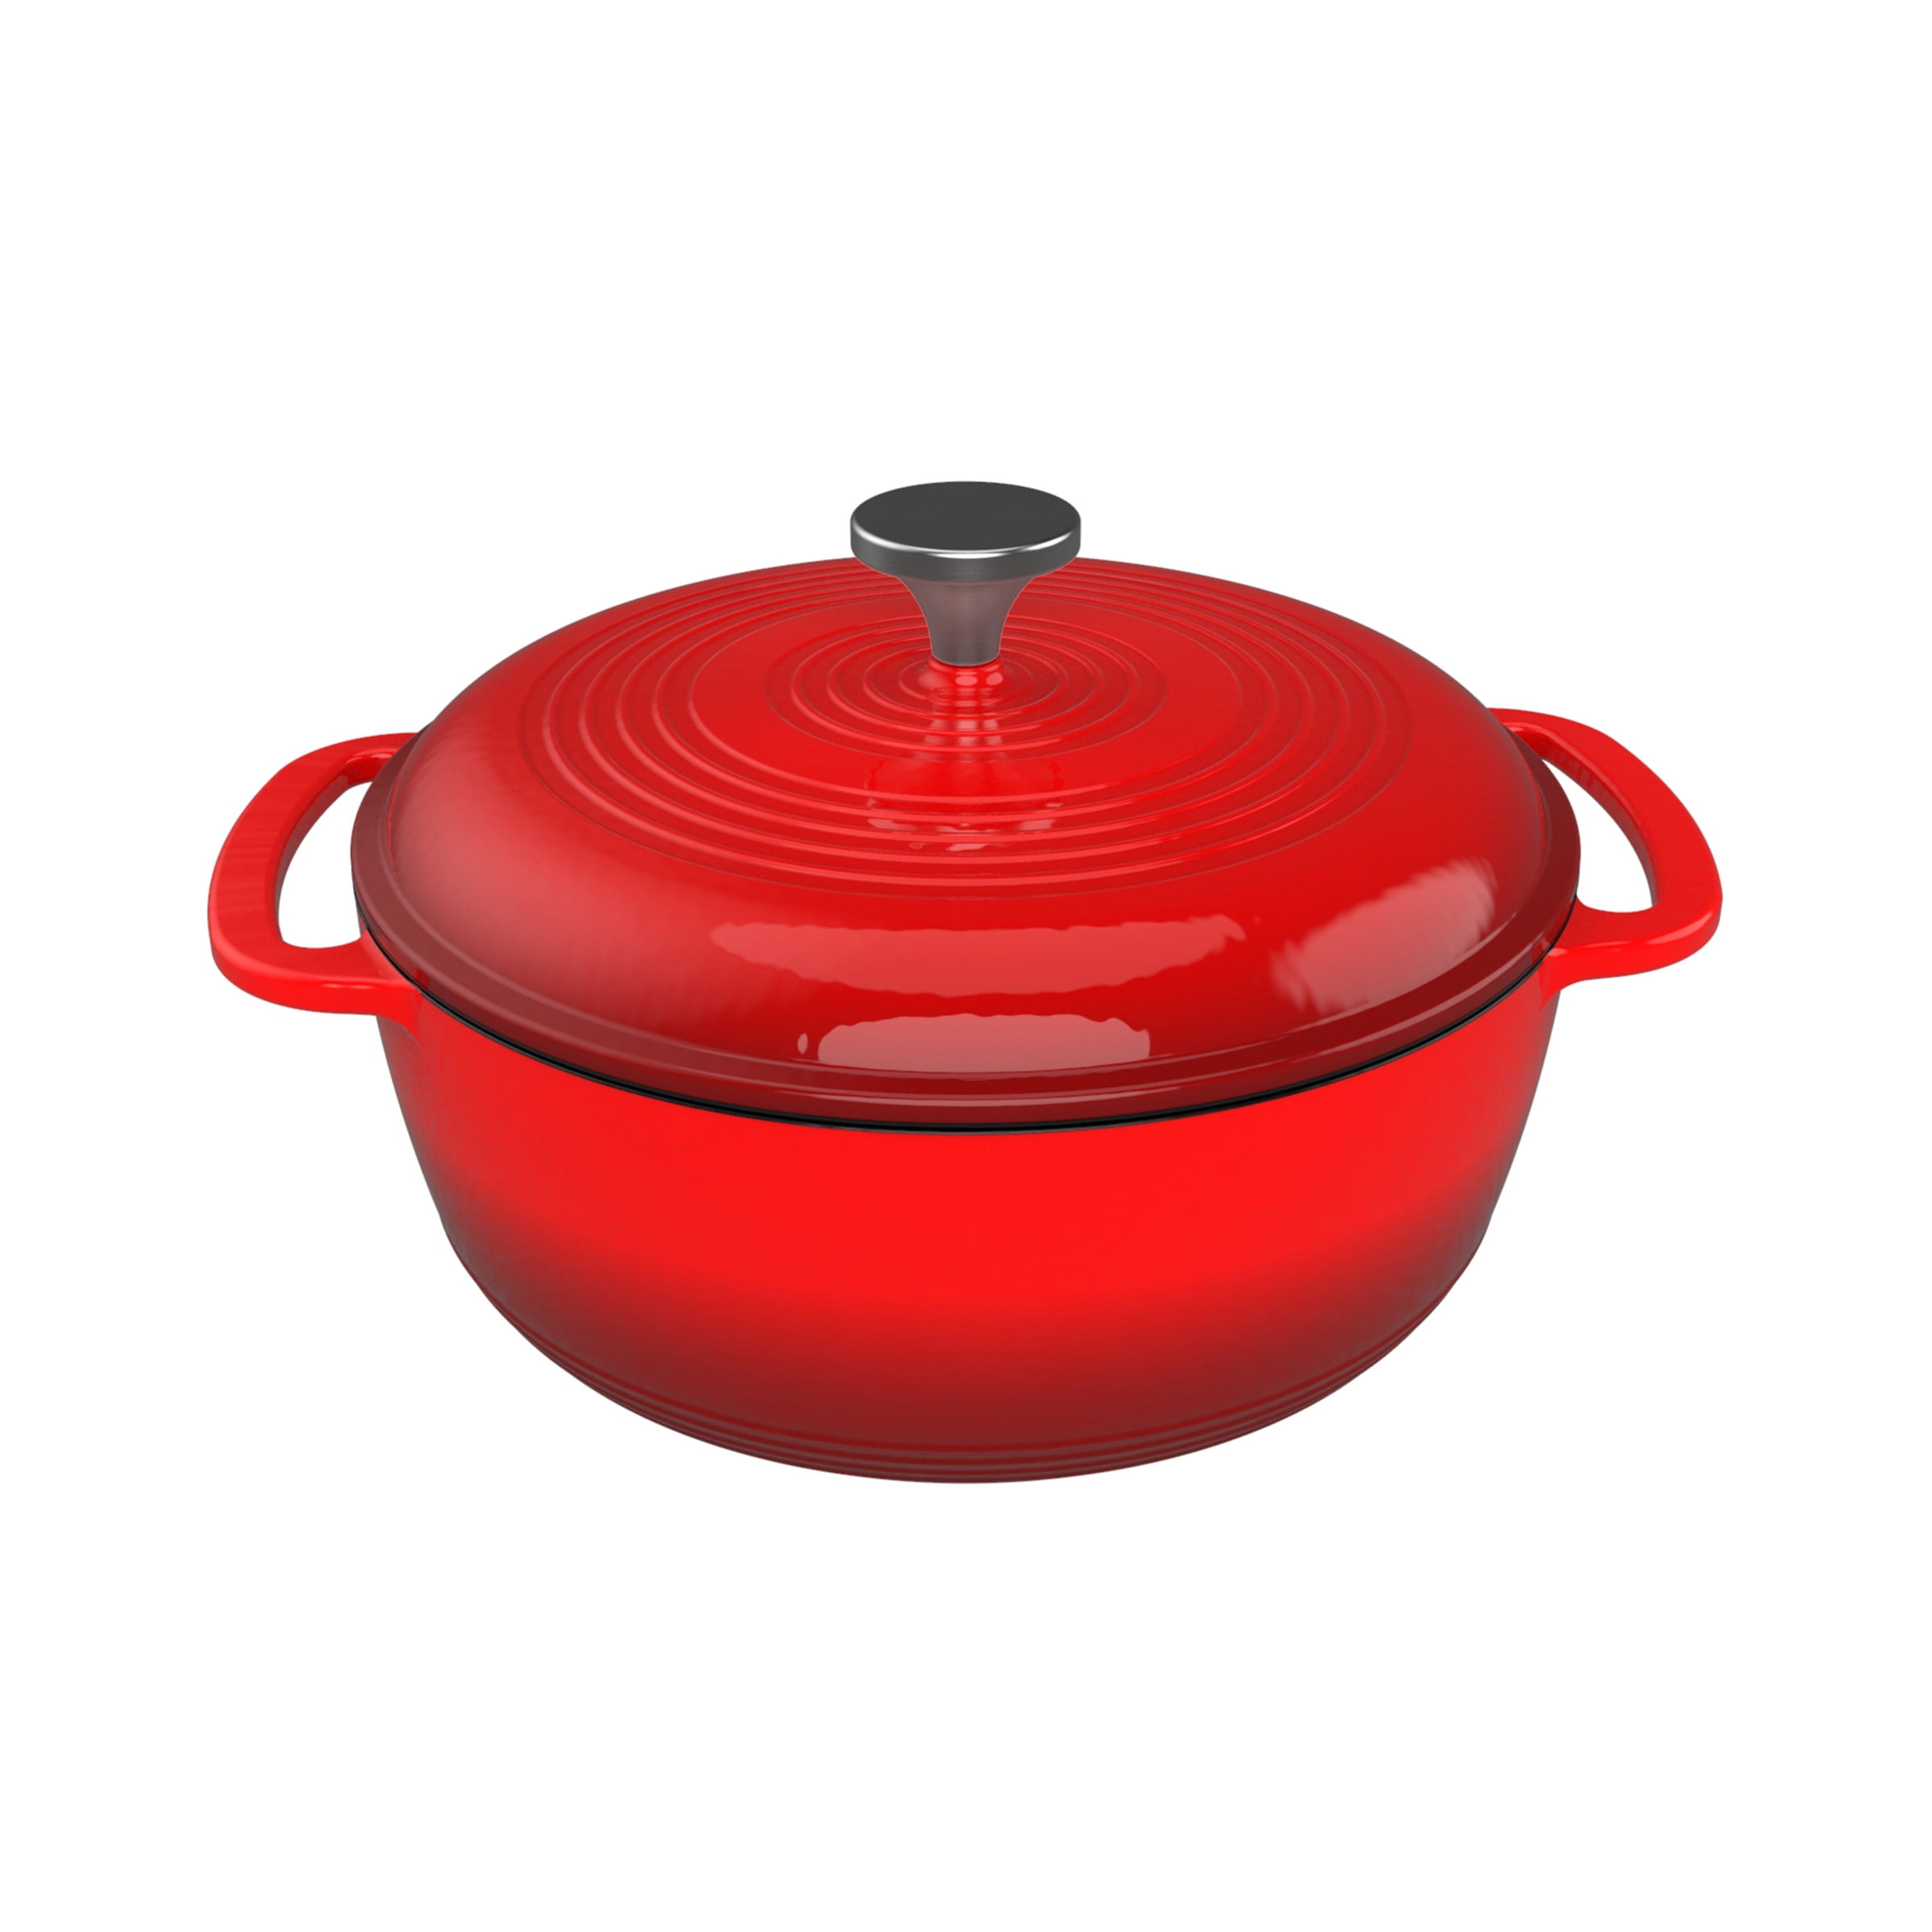 WISELADY Enameled Cast Iron Dutch Oven Bread Baking Pot with Lid (3QT, Red)